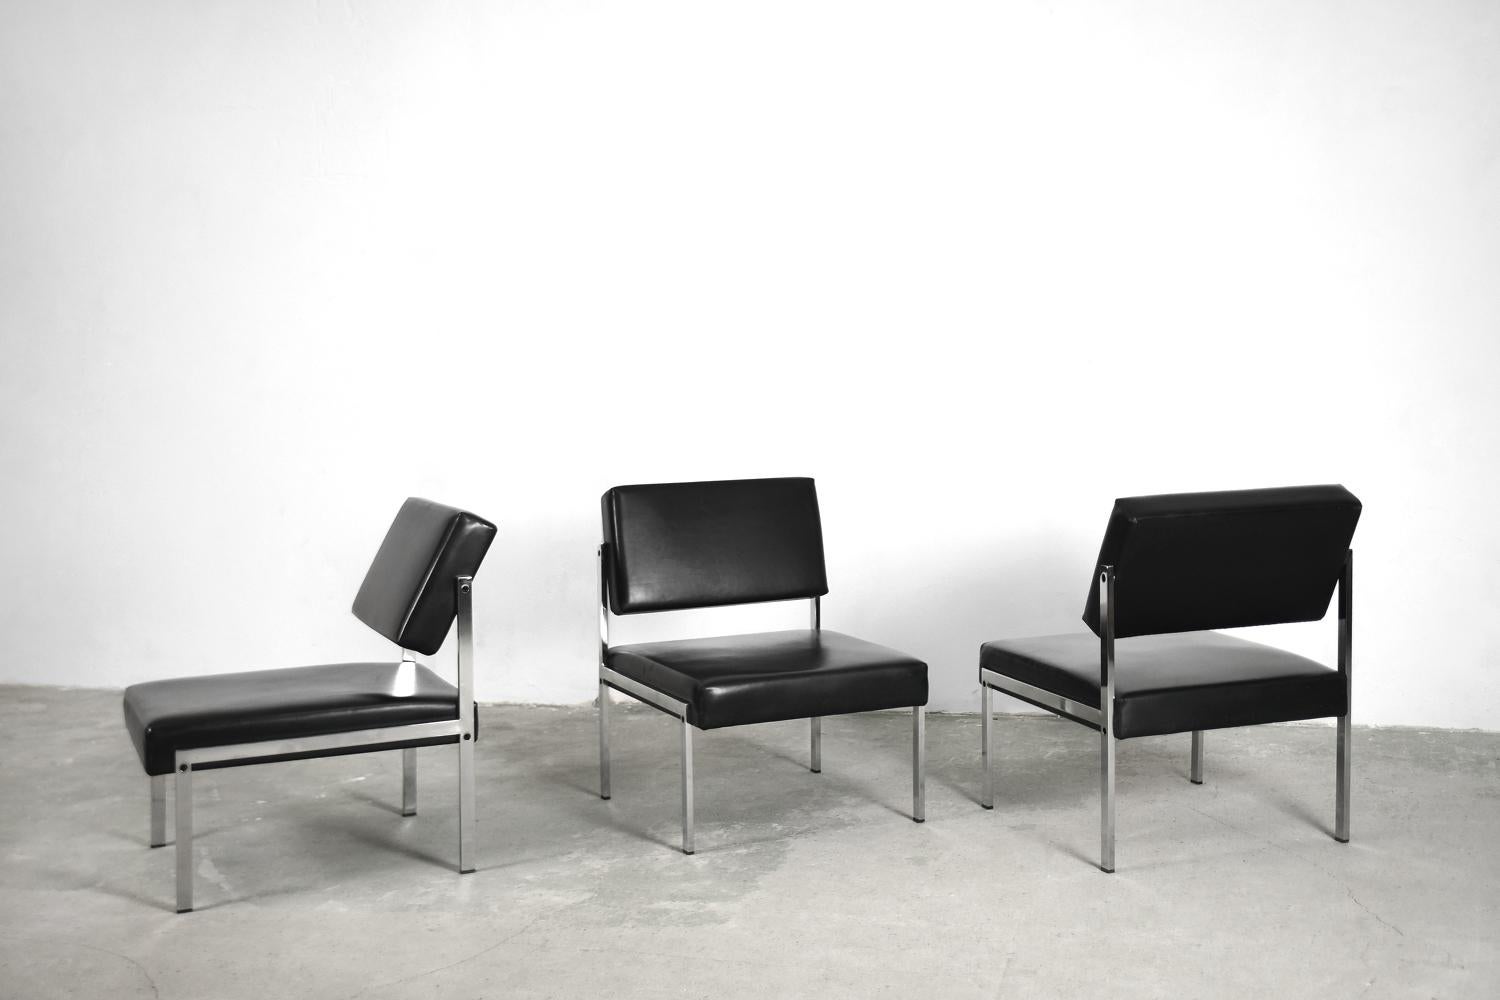 Minimalist German Chrome and Leather Modular Lounge Chairs from Brune, 1960s For Sale 9